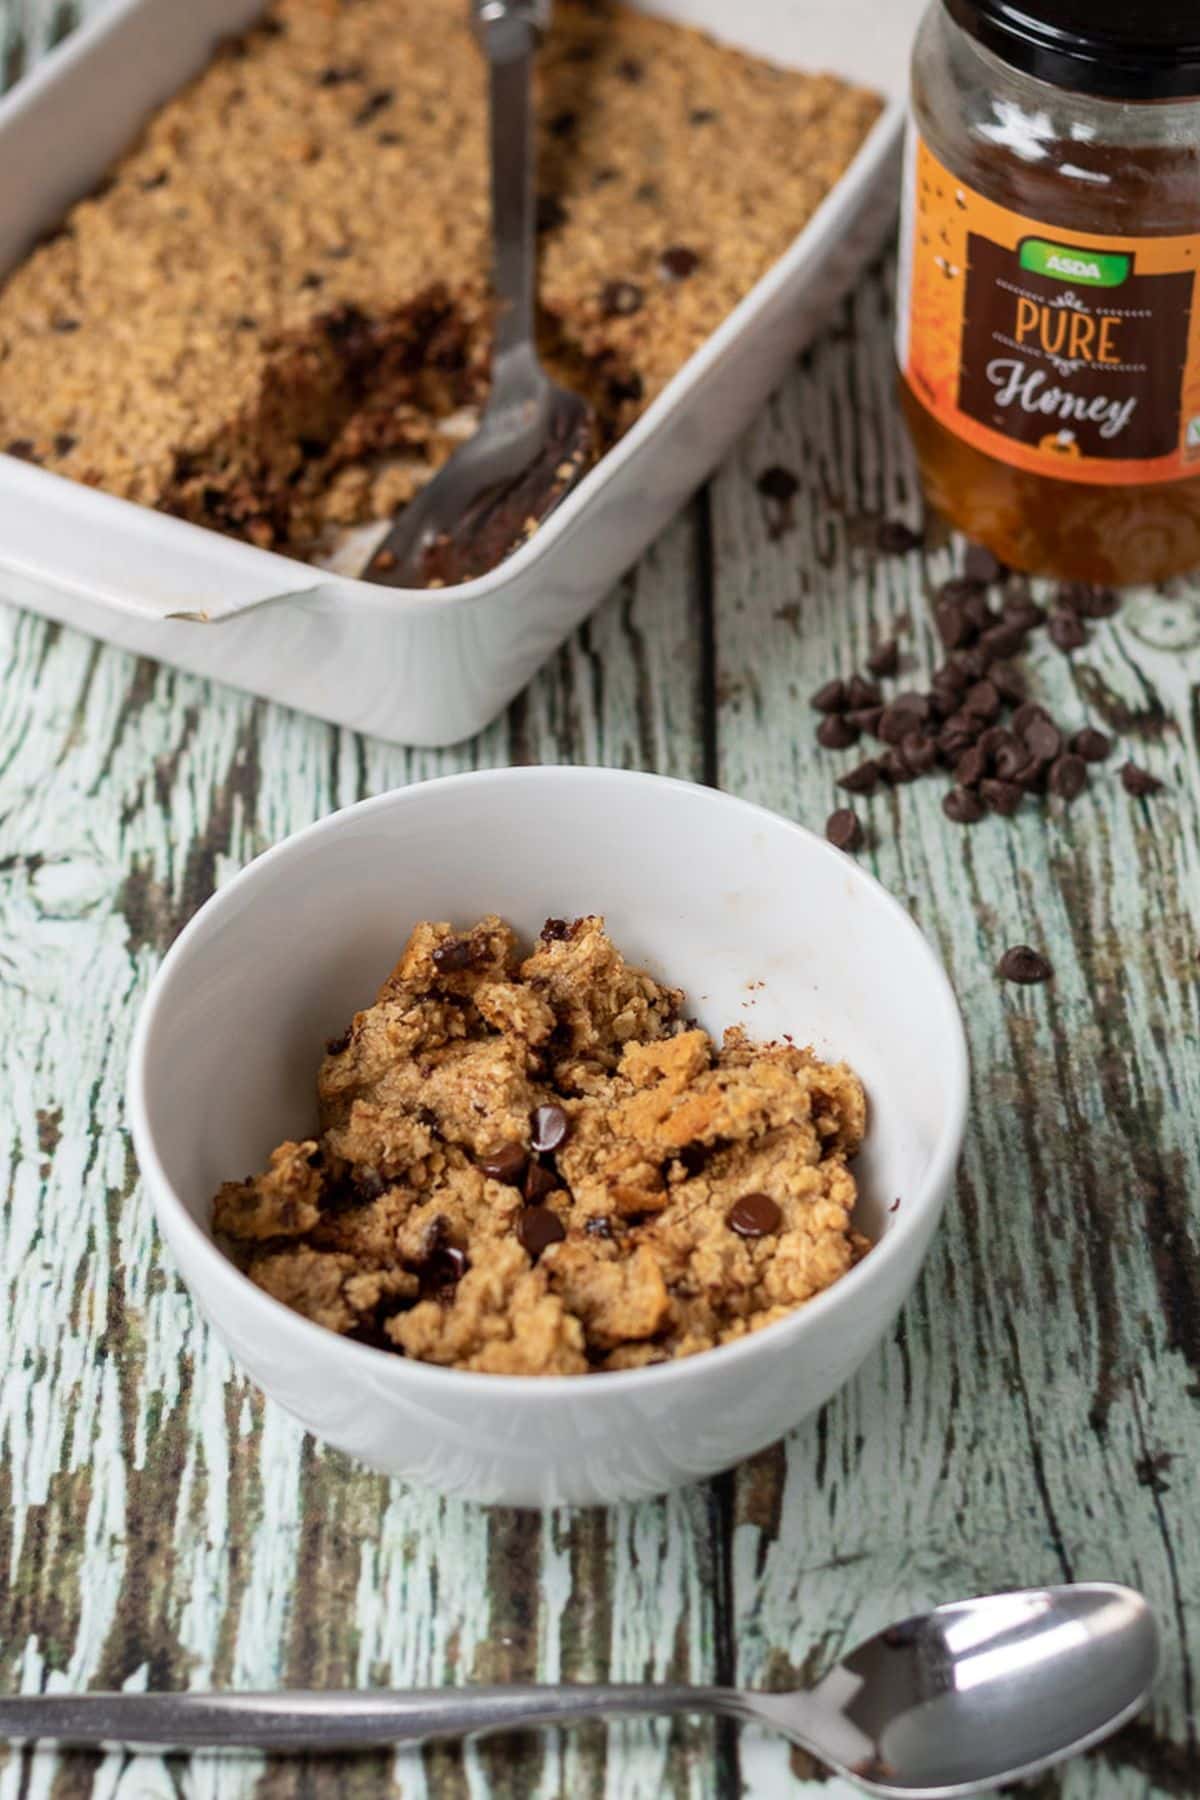 A bowls of chocolate peanut butter baked oats with a spoon in front. Rest of the recipe ins a casserole dish in the background with a jar of honey beside.